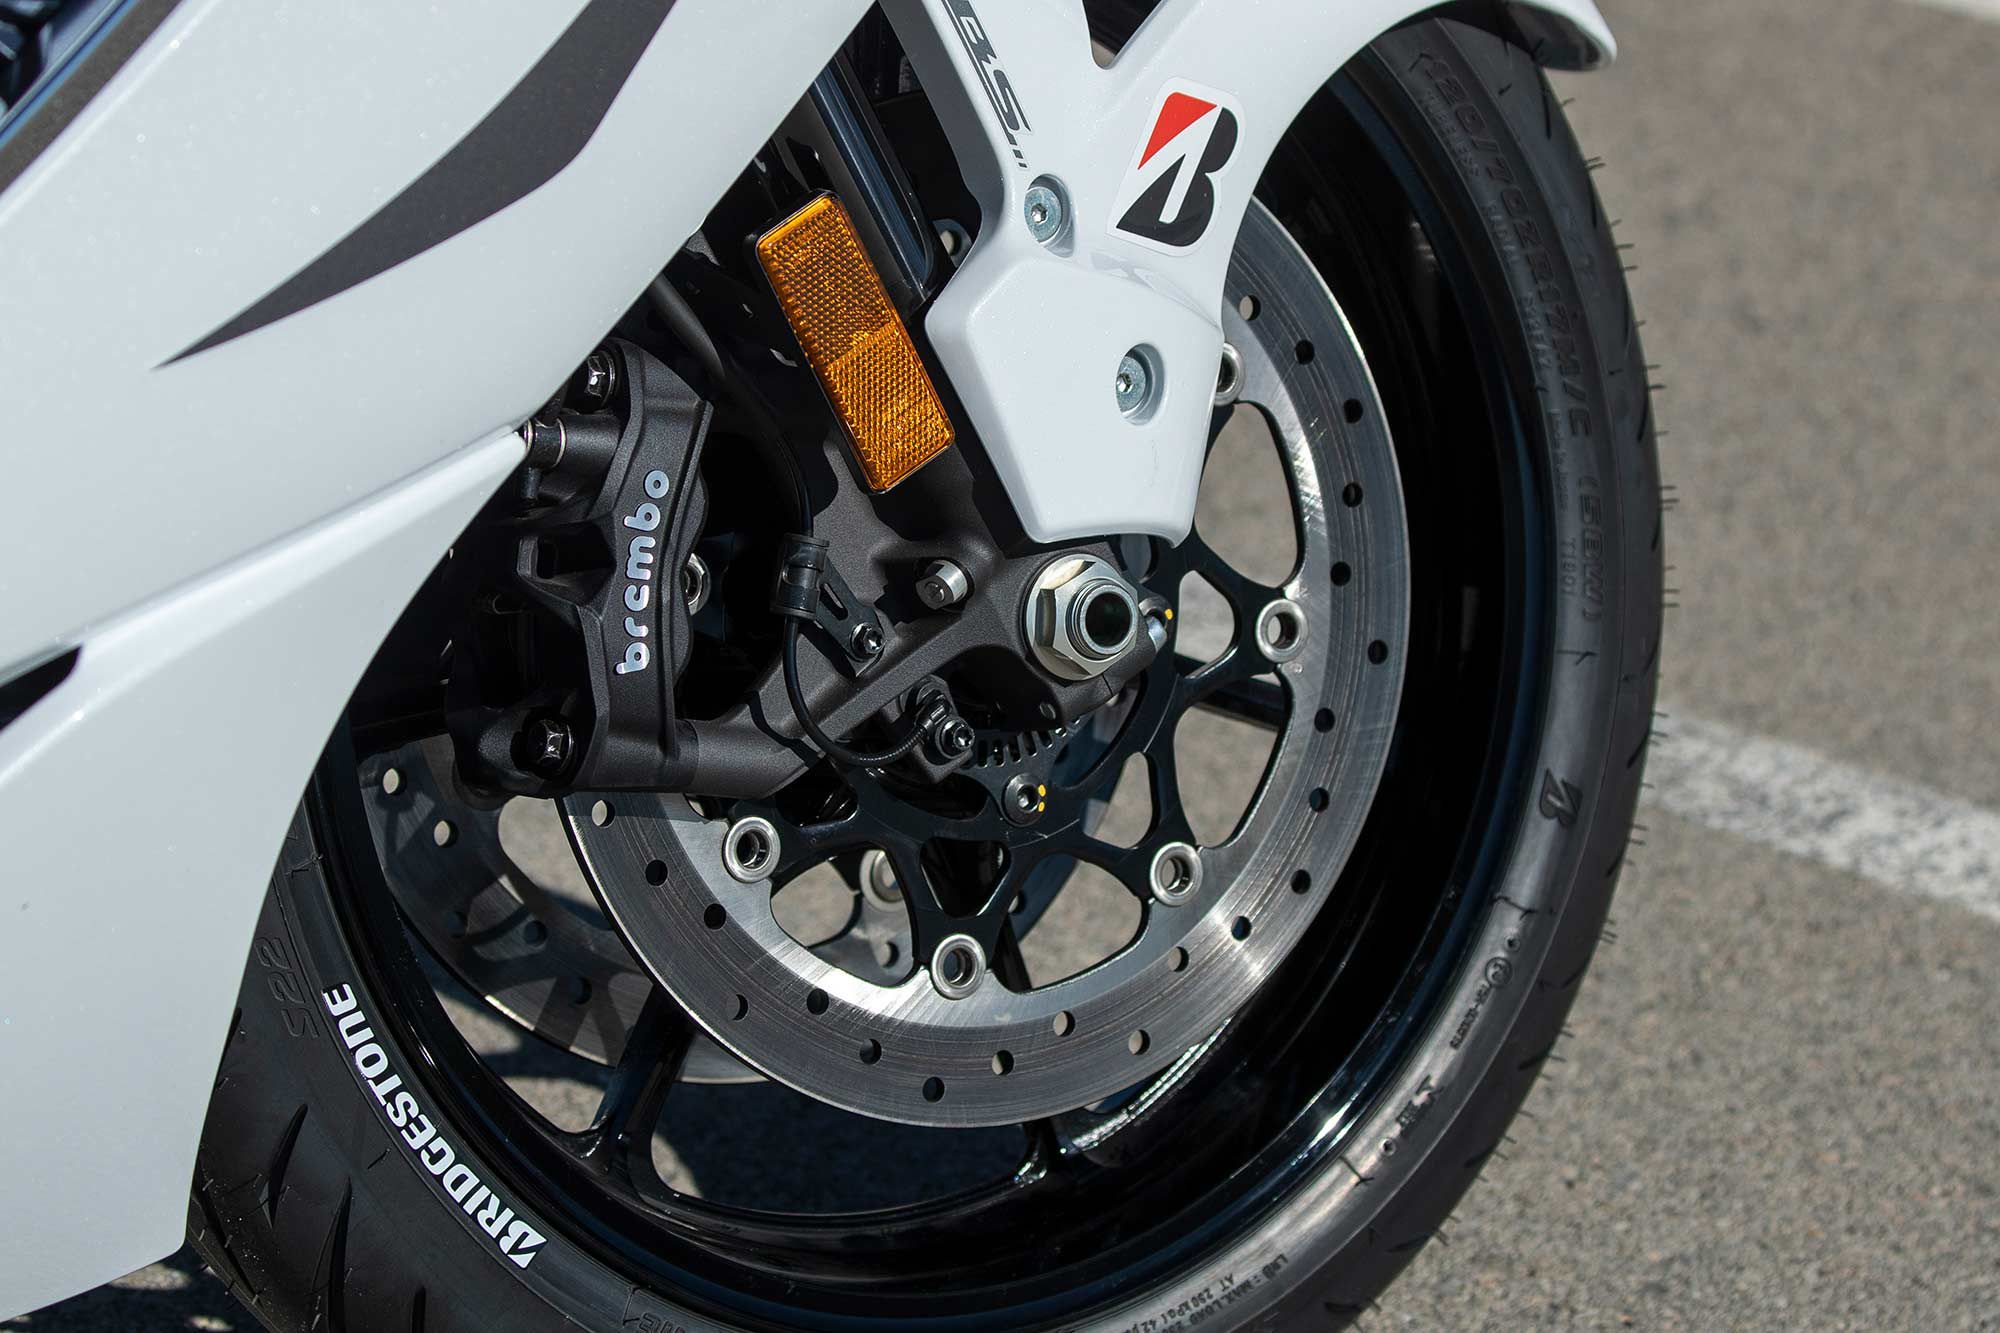 The 2022 Hayabusa benefits from oversized front brakes with Brembo’s beautifully machined Stylema calipers. Braking performance is a big improvement, but there is still a hint of fade after prolonged track use.